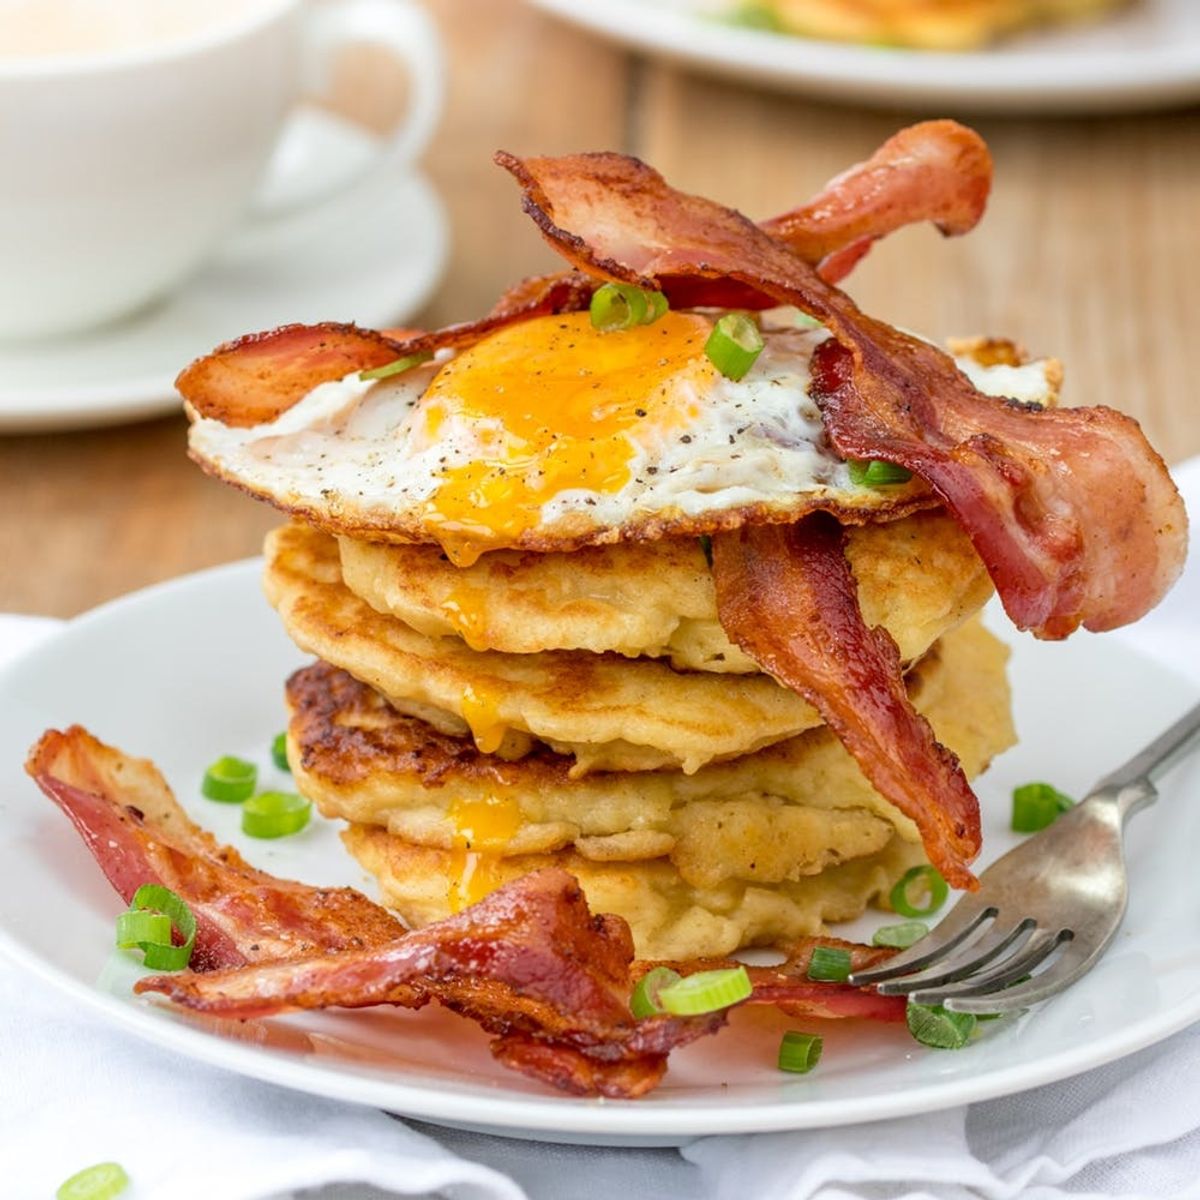 Try This Irish Boxty Breakfast Recipe for St Patrick’s Day